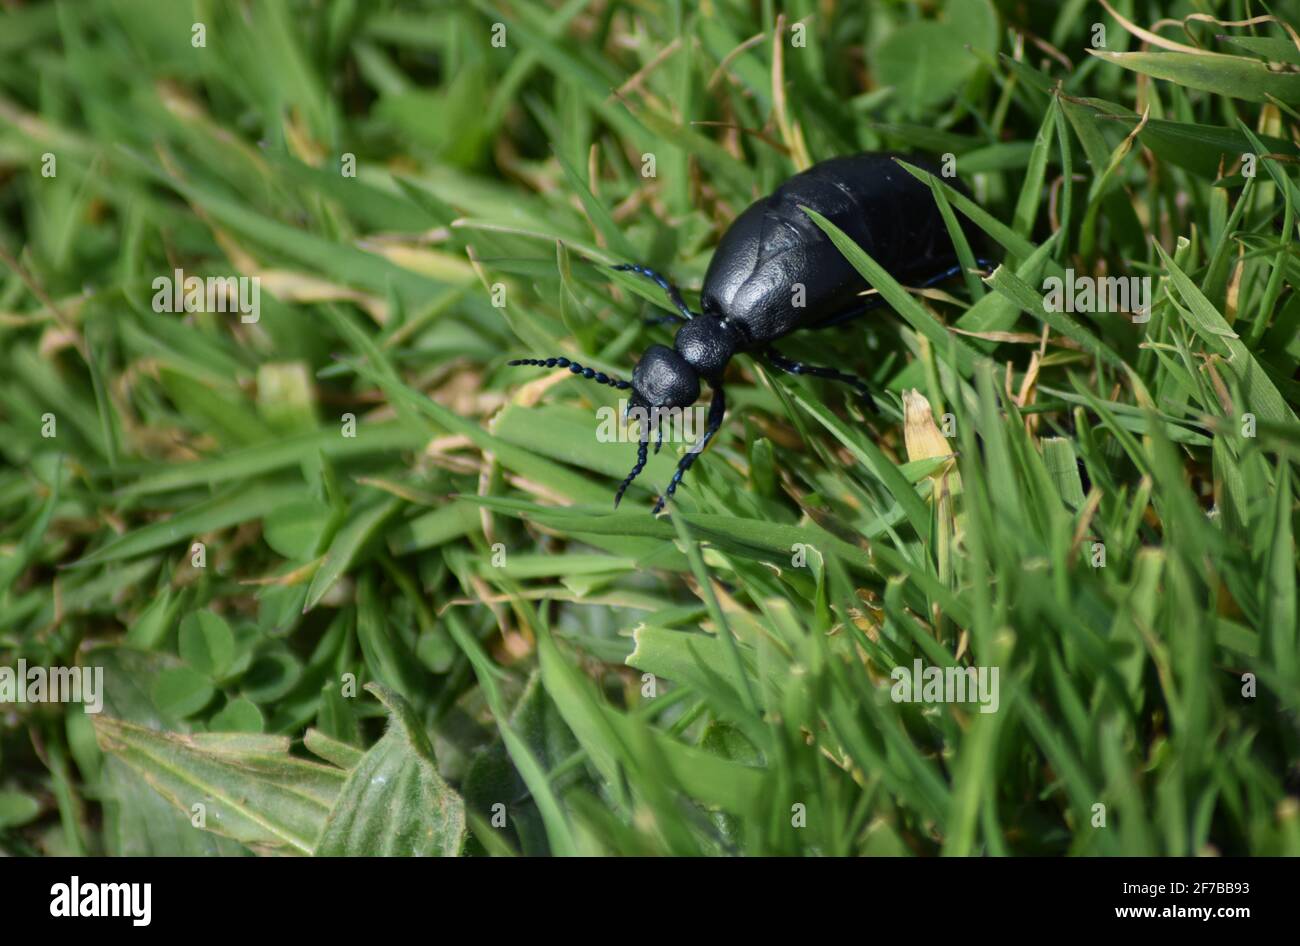 Oil Beetle front view Stock Photo